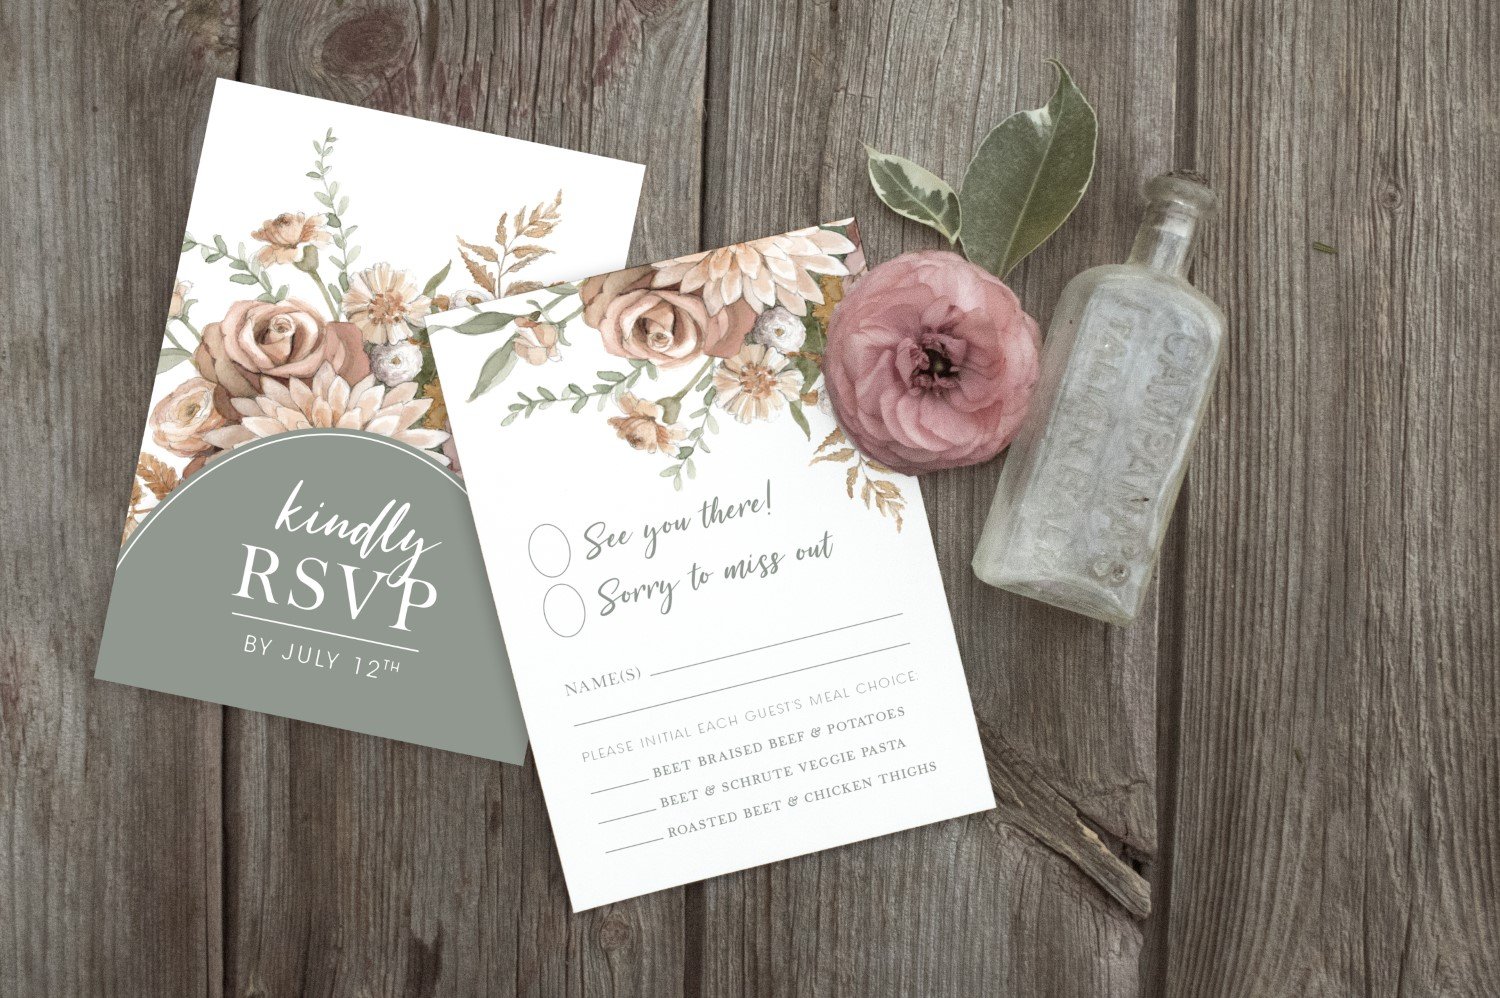 Sage Green and Rust Romantic Floral Wedding Invitations and Stationery